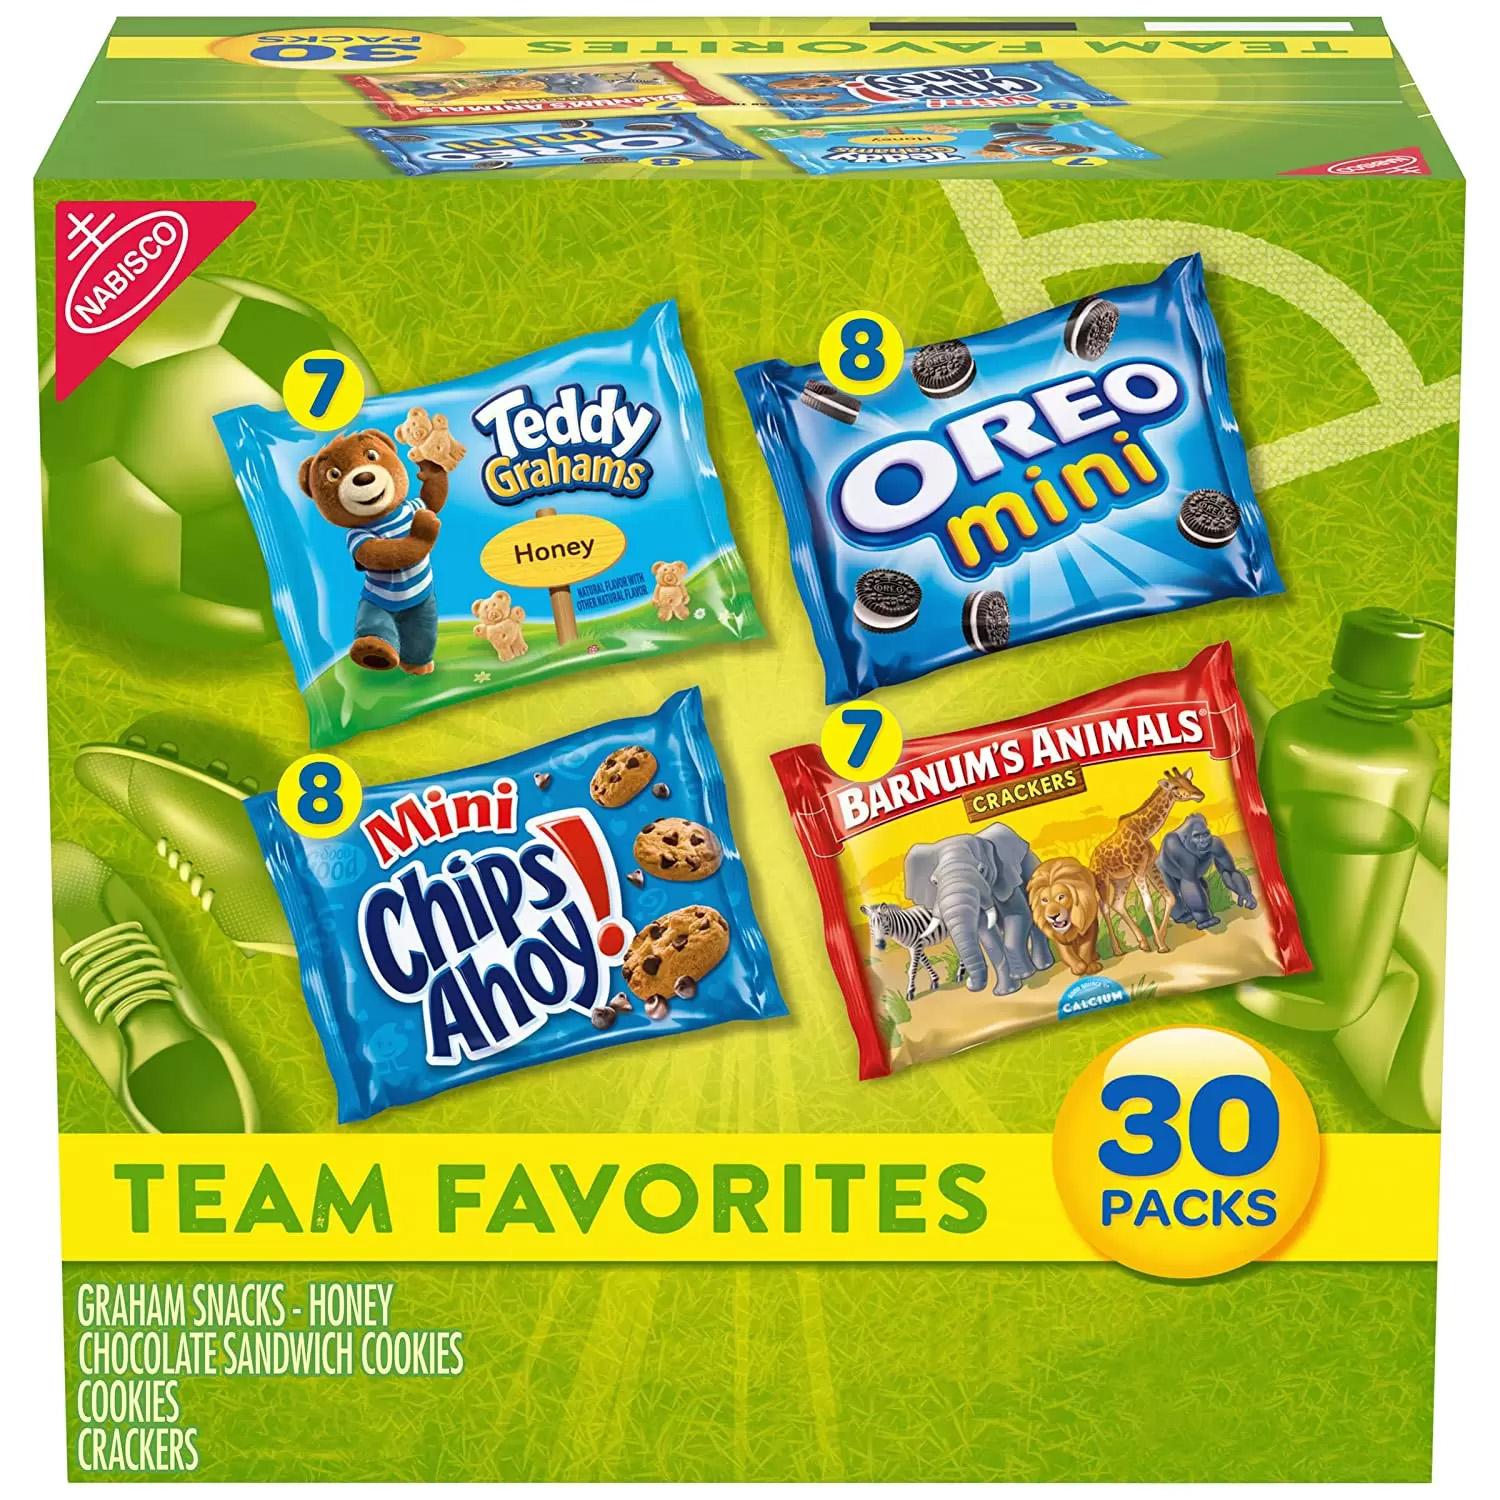 30 Nabisco Team Favorites Cookies and Crackers Variety Pack for $6 Shipped